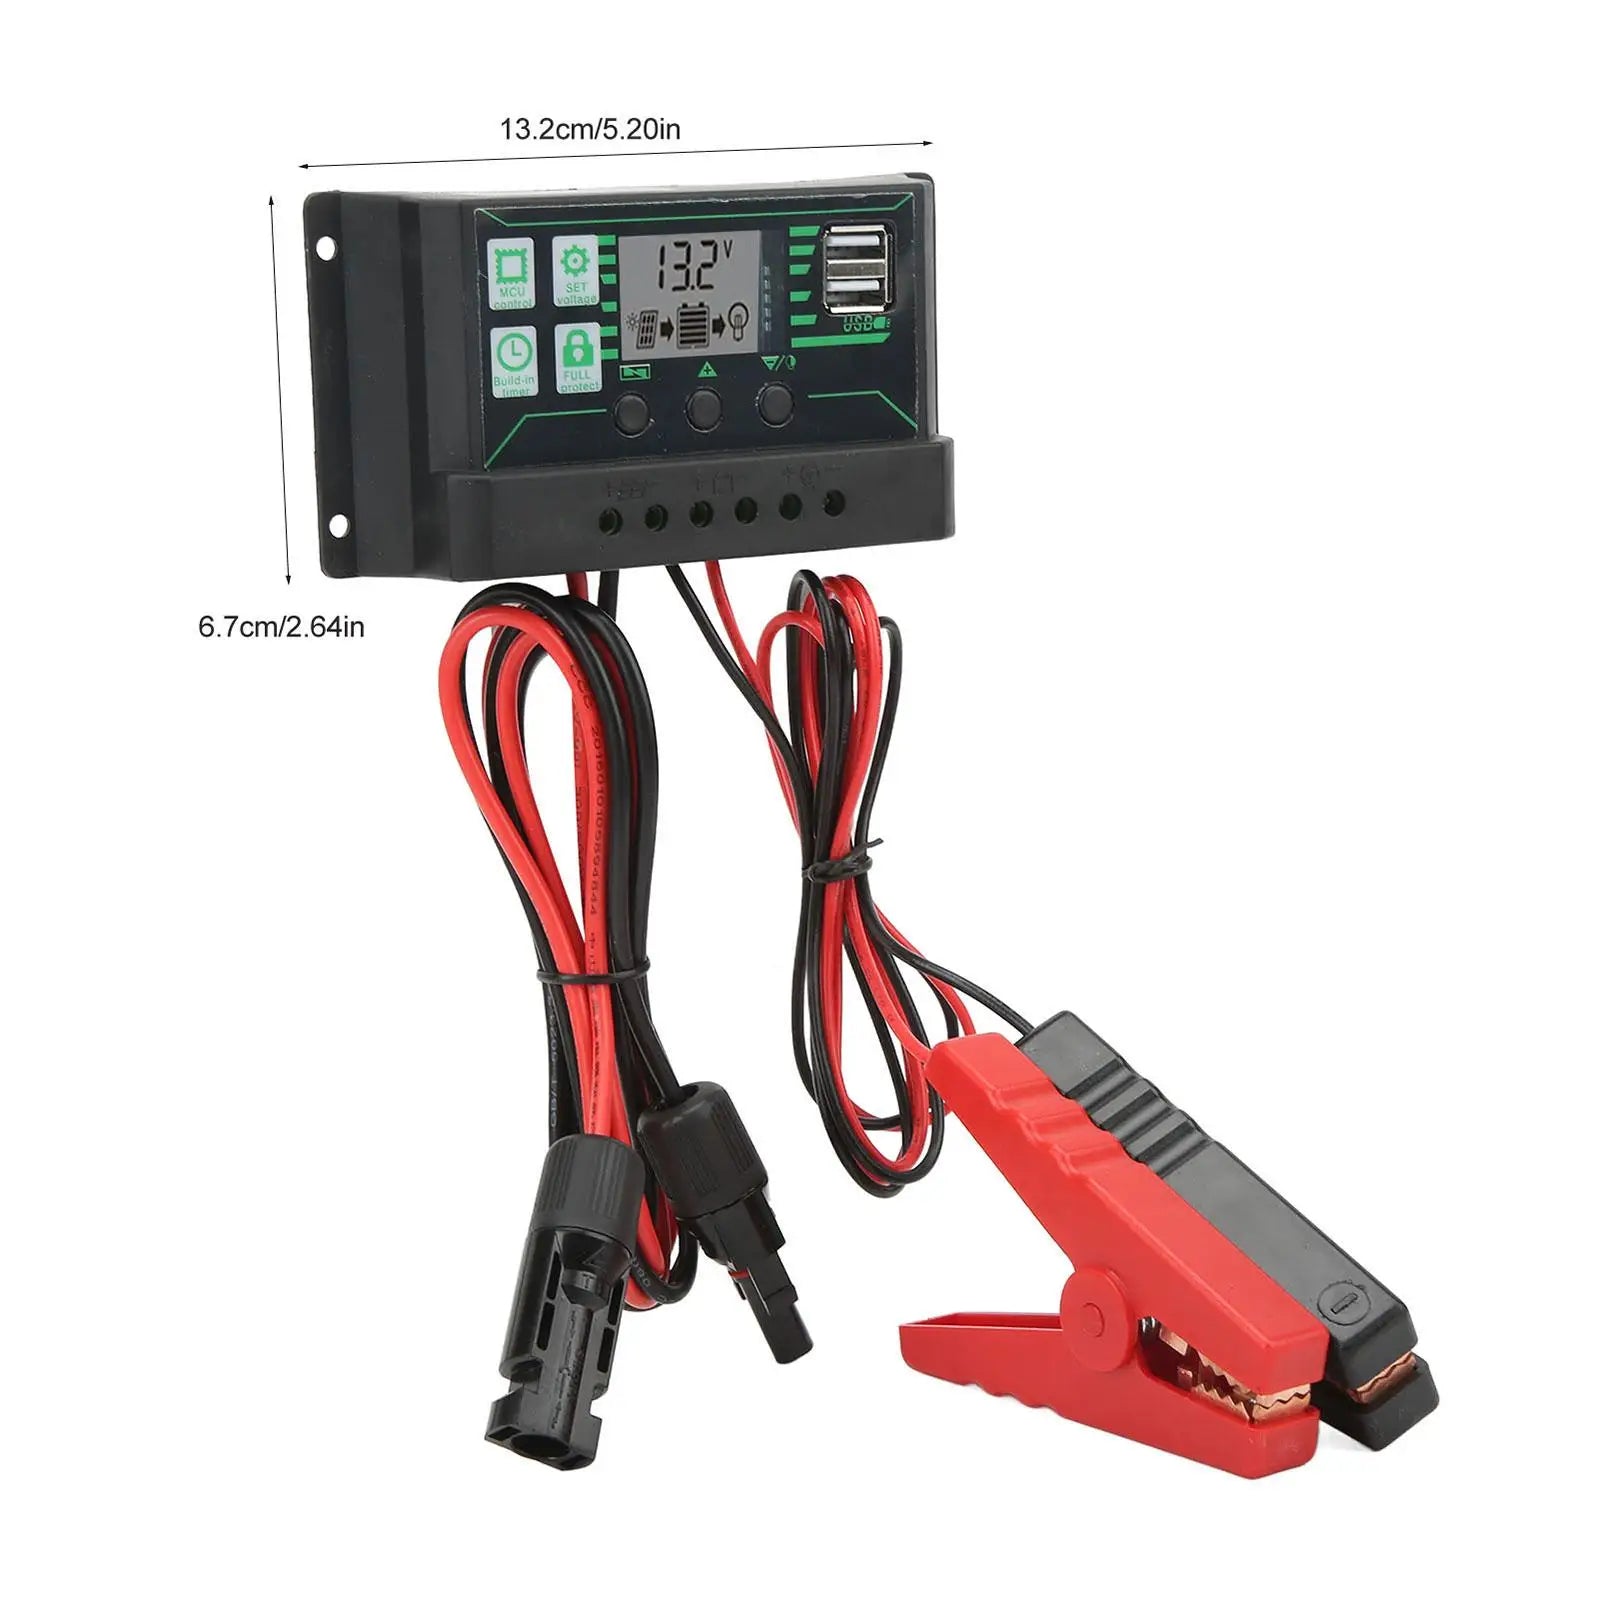 MPPT 10/20/30/60/100A Solar Charge Controller, Automatically adjusts charging voltage based on battery quality.